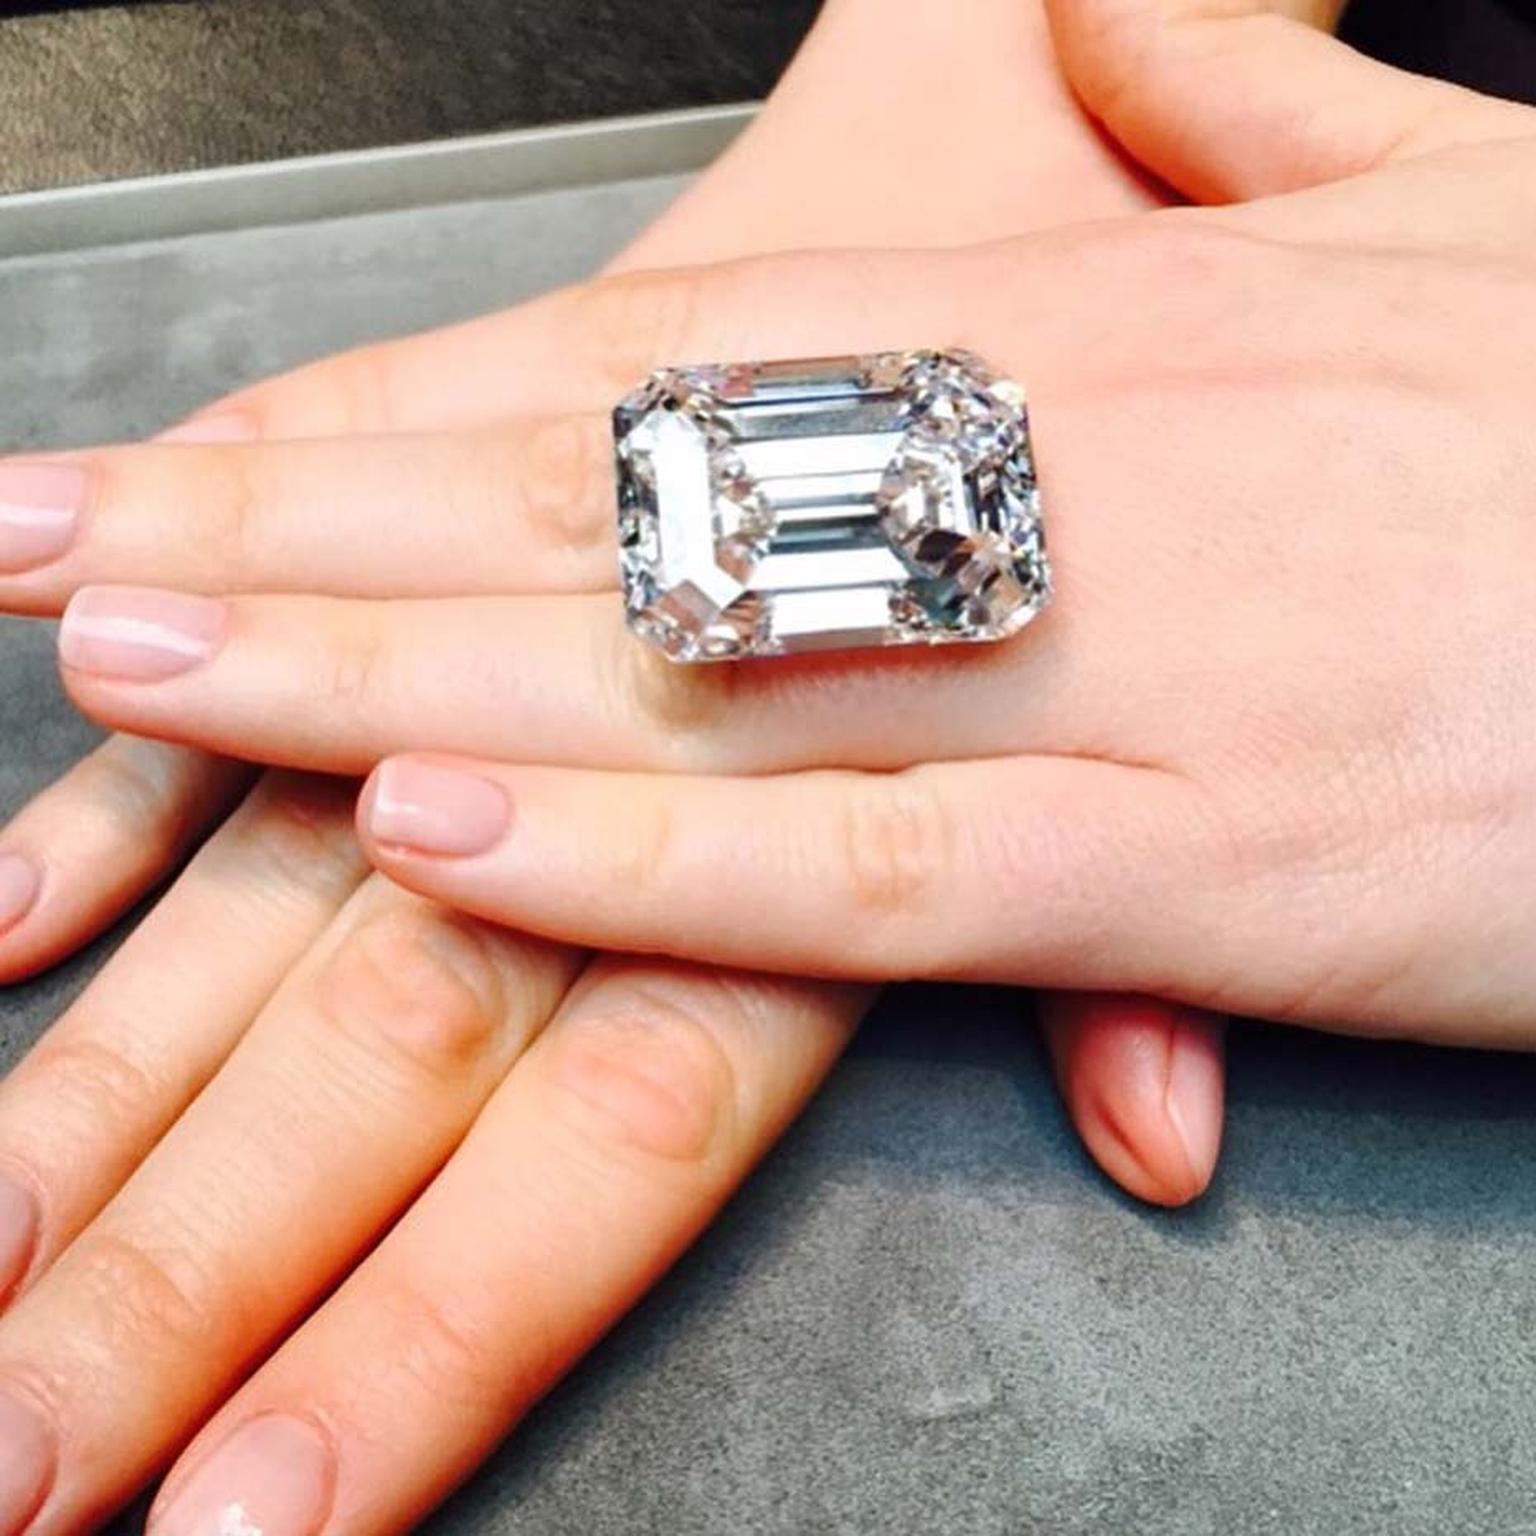 A diamond of these proportions in this shape is so rare that it is, in fact, the largest emerald-cut diamond ever to be offered at auction, with an estimate of $19-25 million, making each carat valued at $190,000.